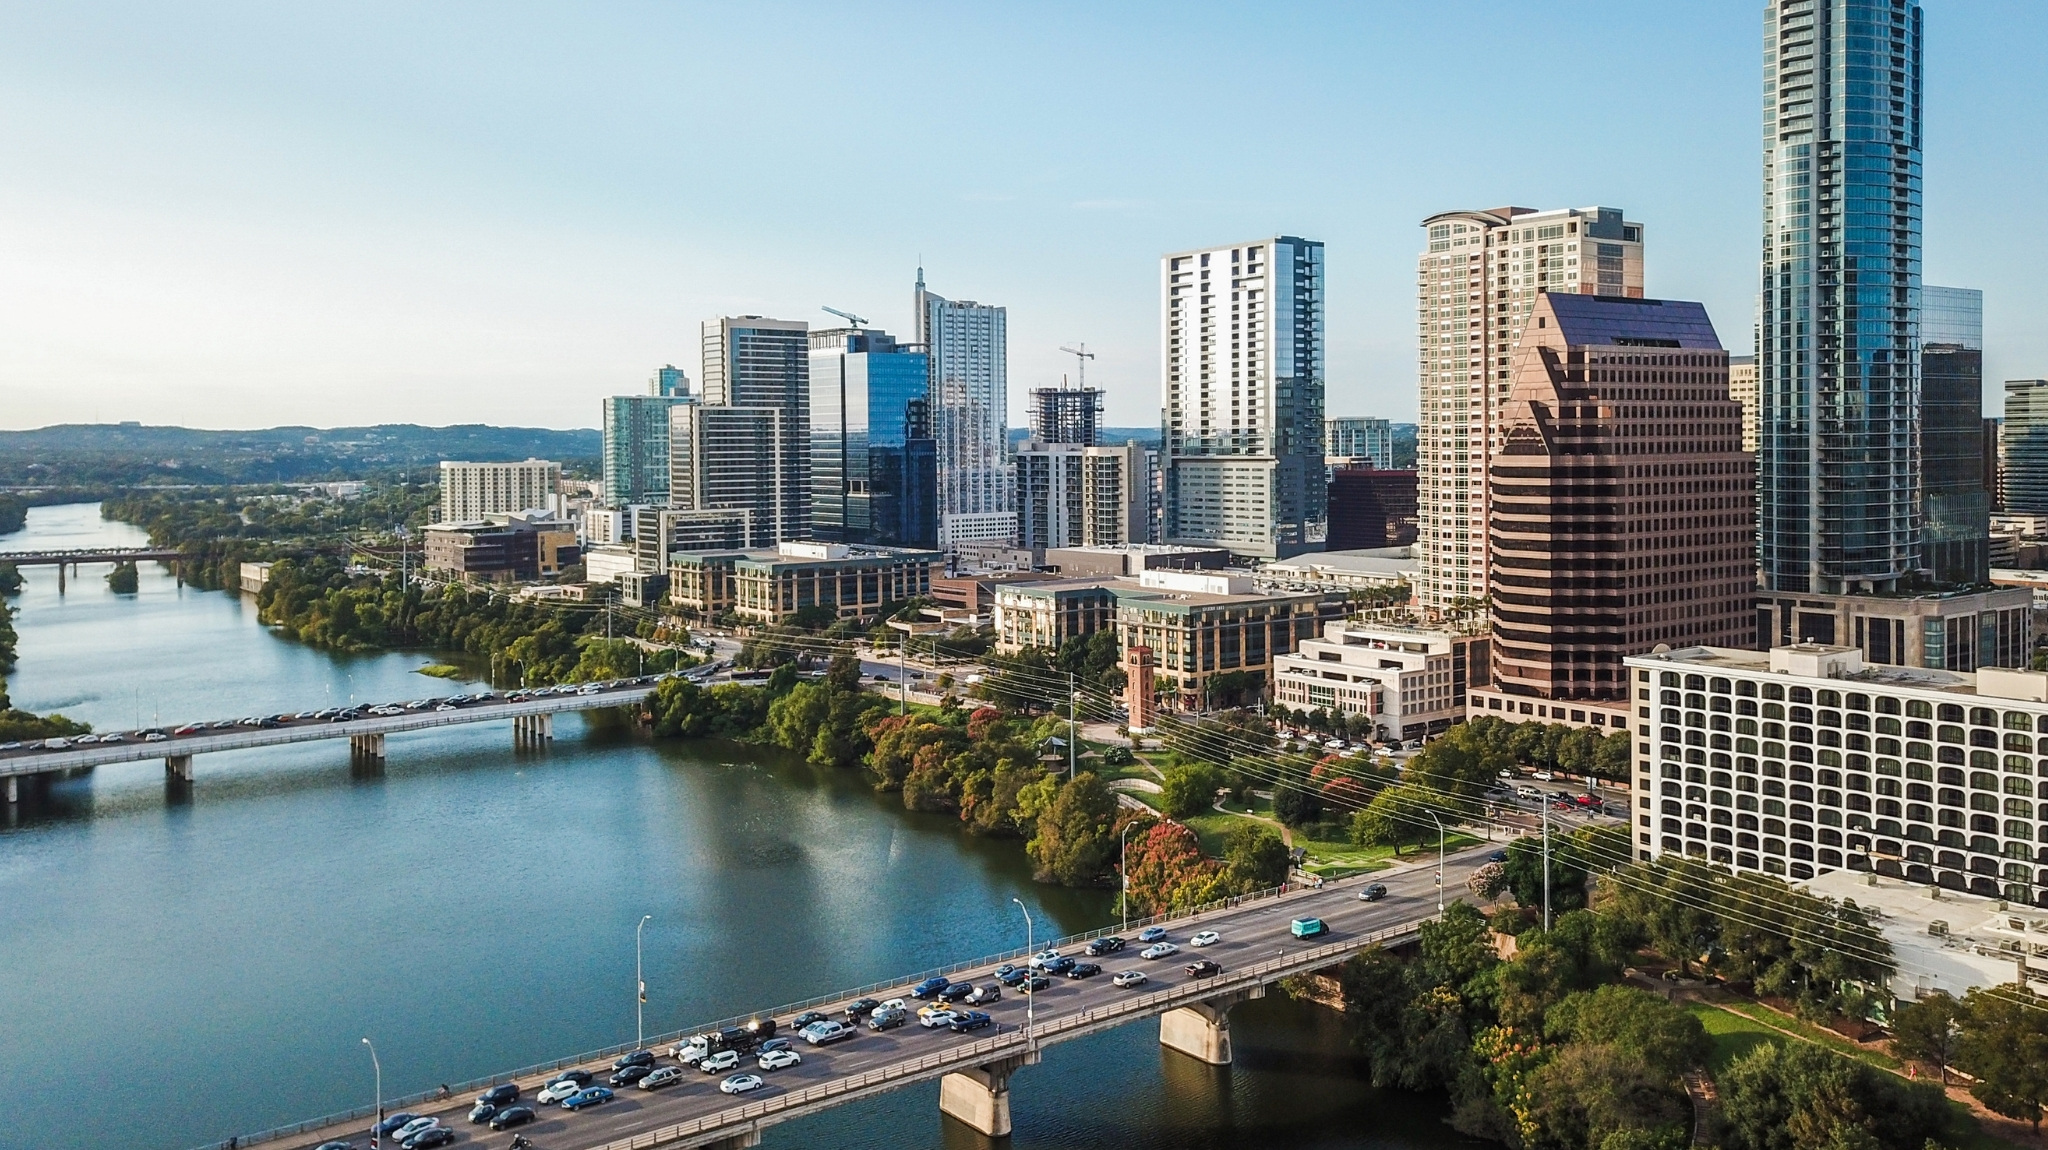 Property Manager in Austin, Tx Services Increase R.O.I. for Real Estate Investors